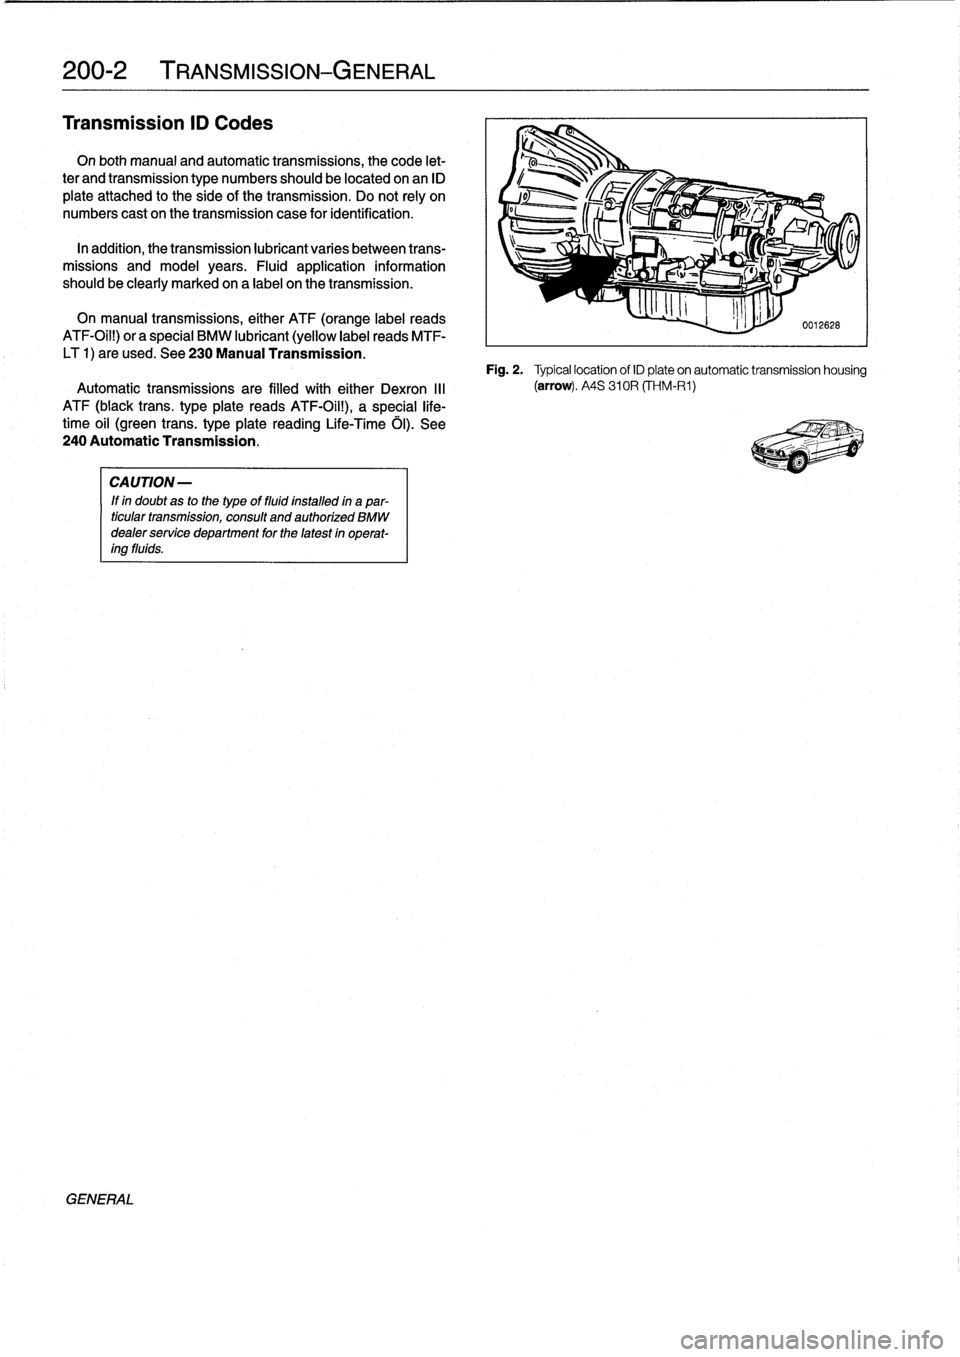 BMW 318i 1997 E36 Owners Guide 
200-2
TRANSMISSION-GENERAL

Transmission
ID
Codes

On
both
manual
and
automatic
transmissions,
the
code
let-

ter
and
transmission
type
numbers
should
be
located
onan
ID

plate
attached
to
the
síde
